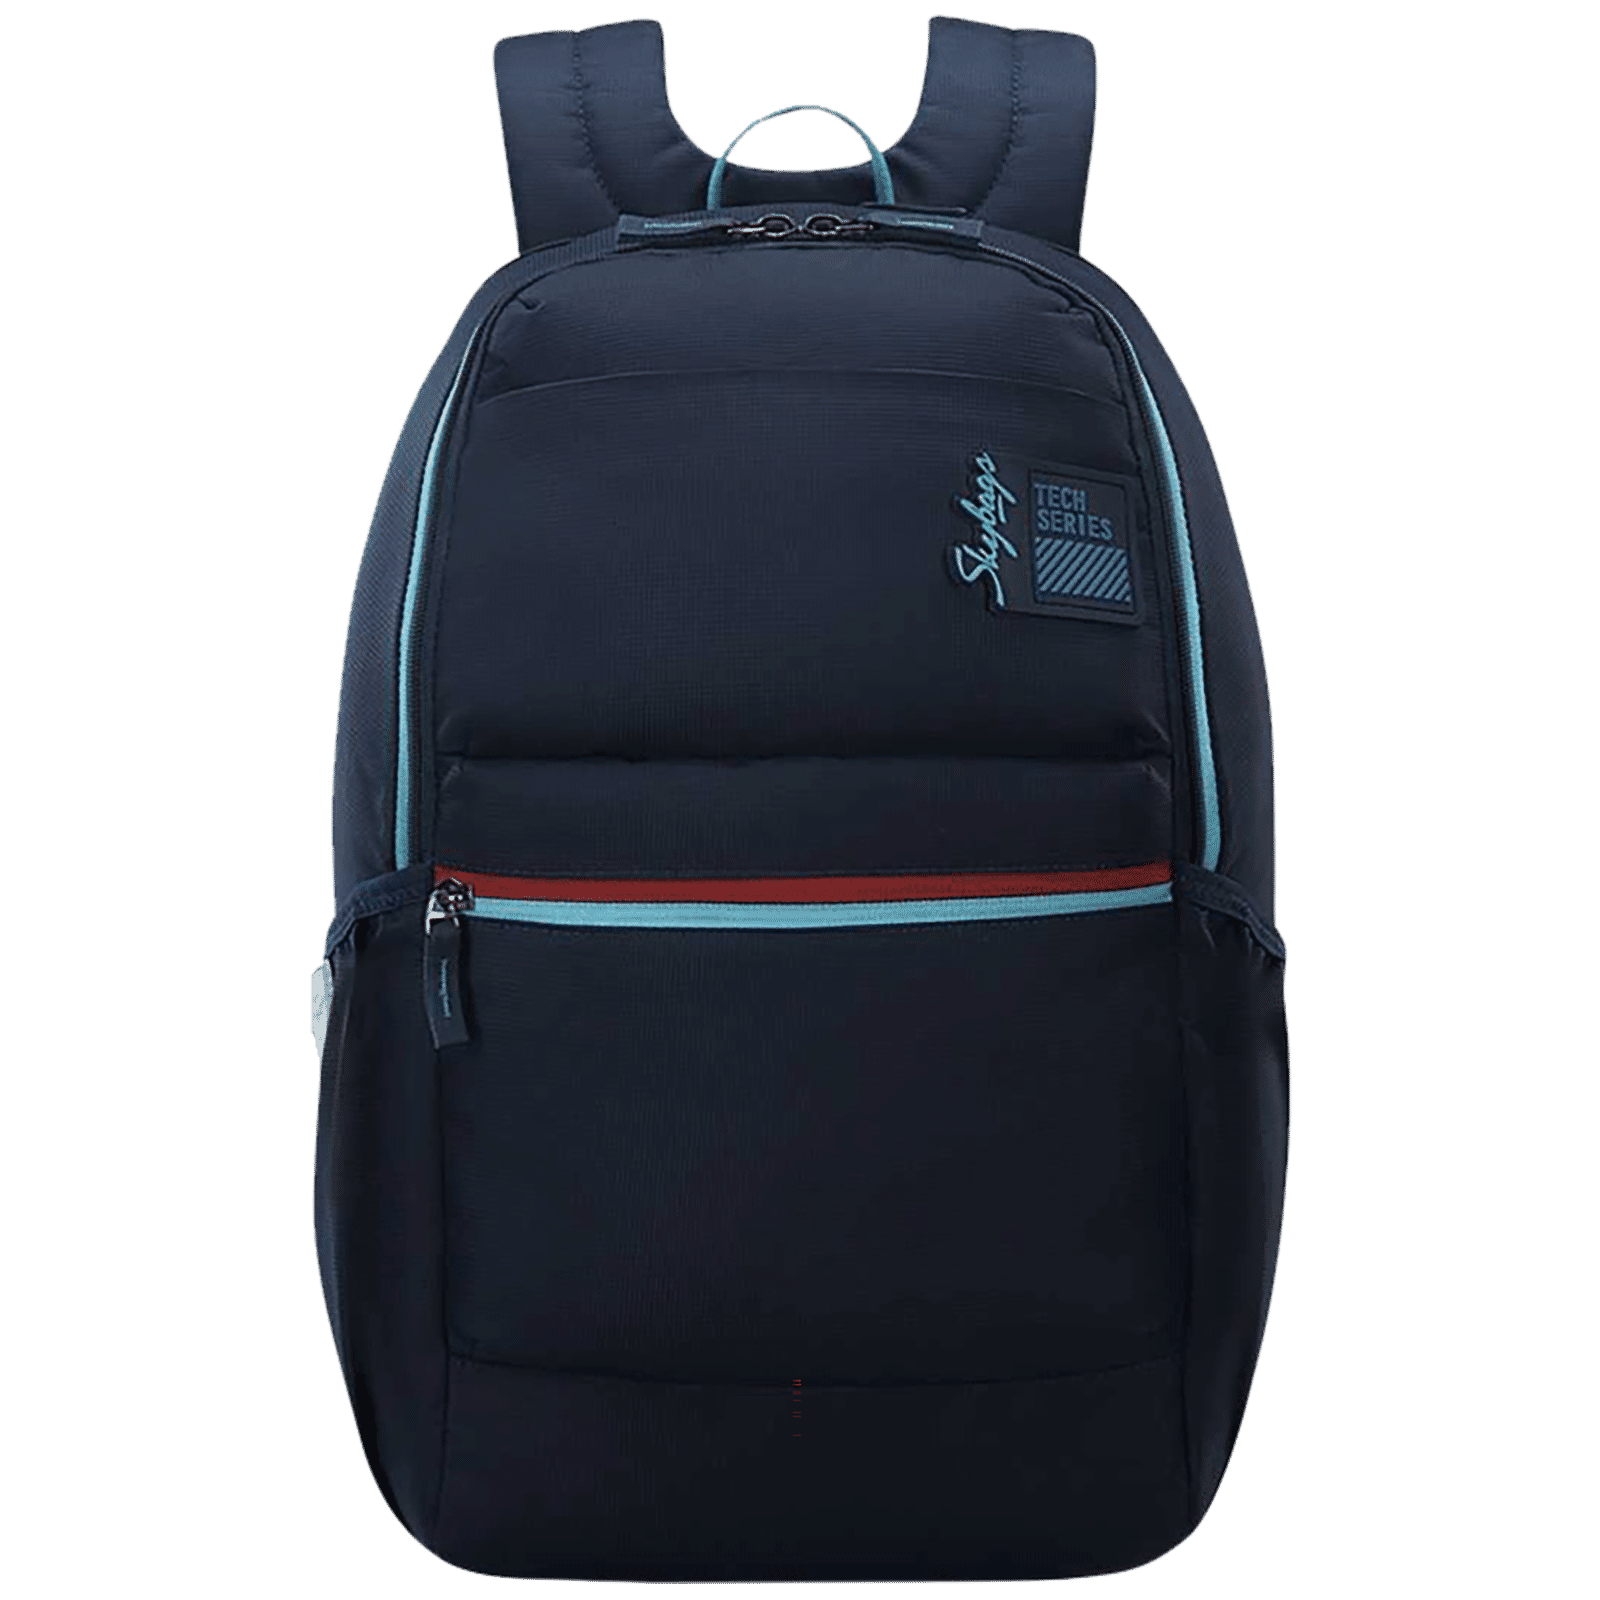 CROMA Unisex-adult Laptop Messenger Bag (Crpcb6105ssd01, Black) :  Amazon.in: Computers & Accessories